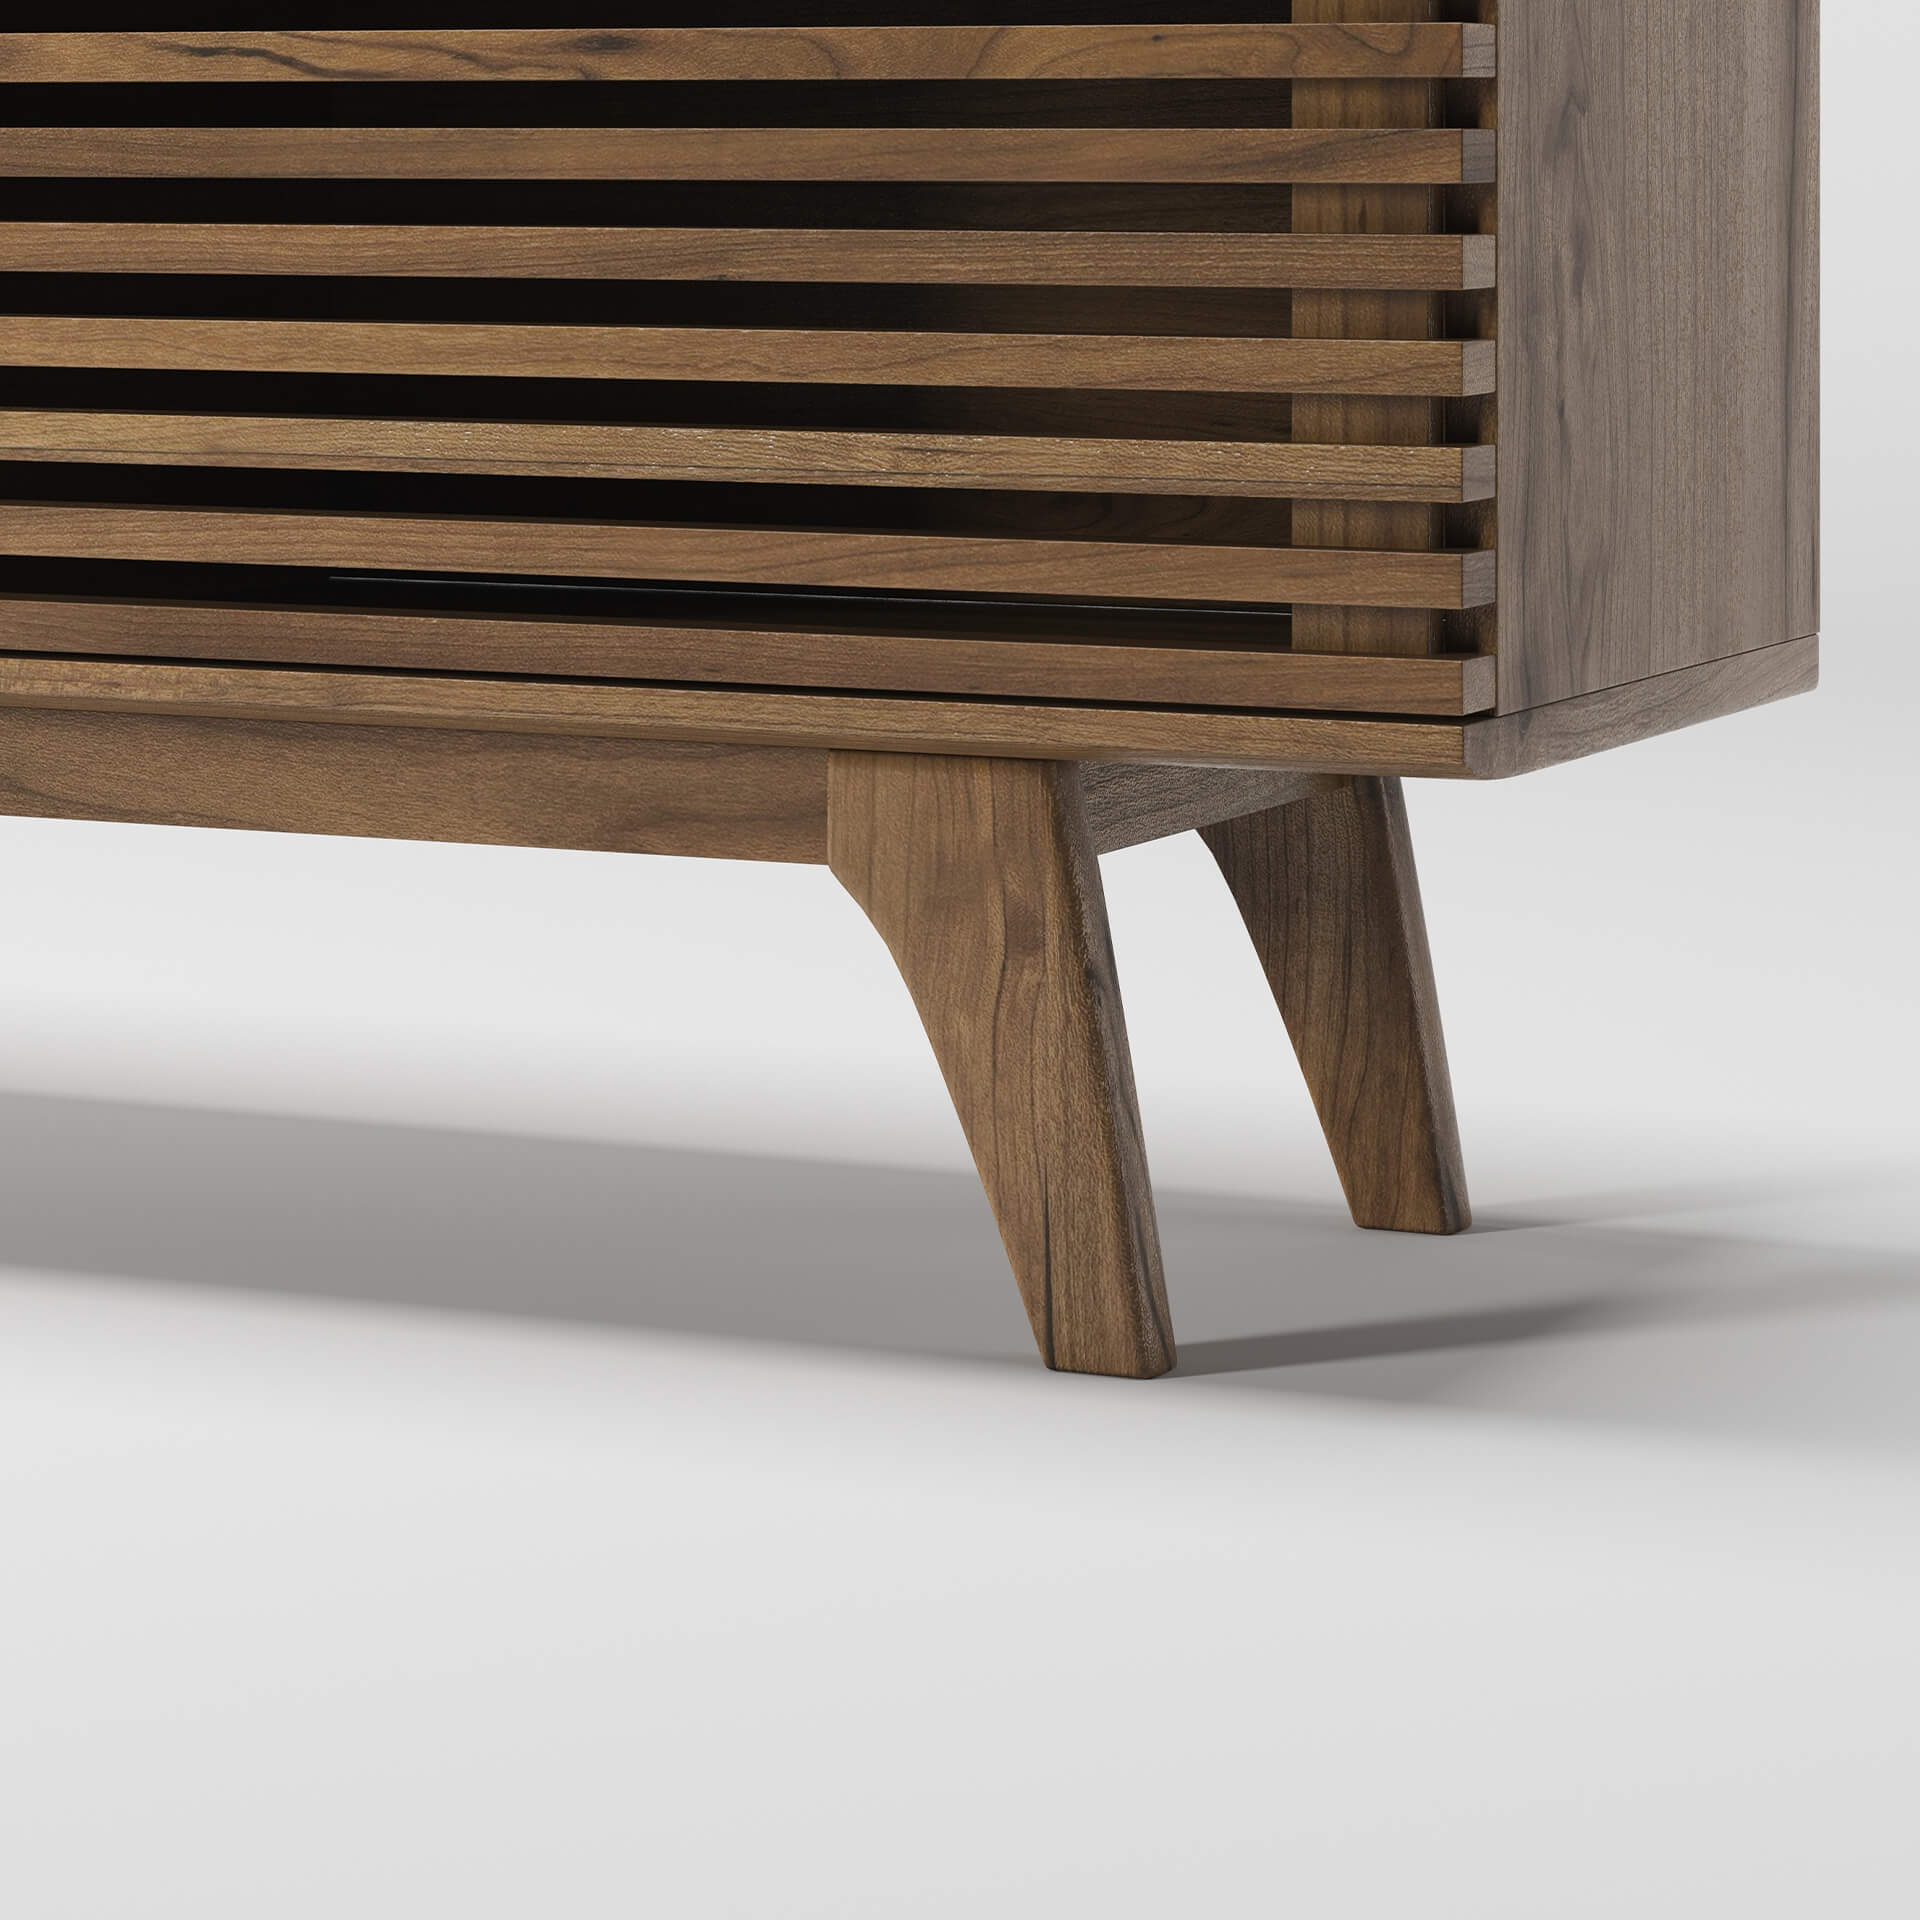 Close-Up 3D Render of Wooden Media Console